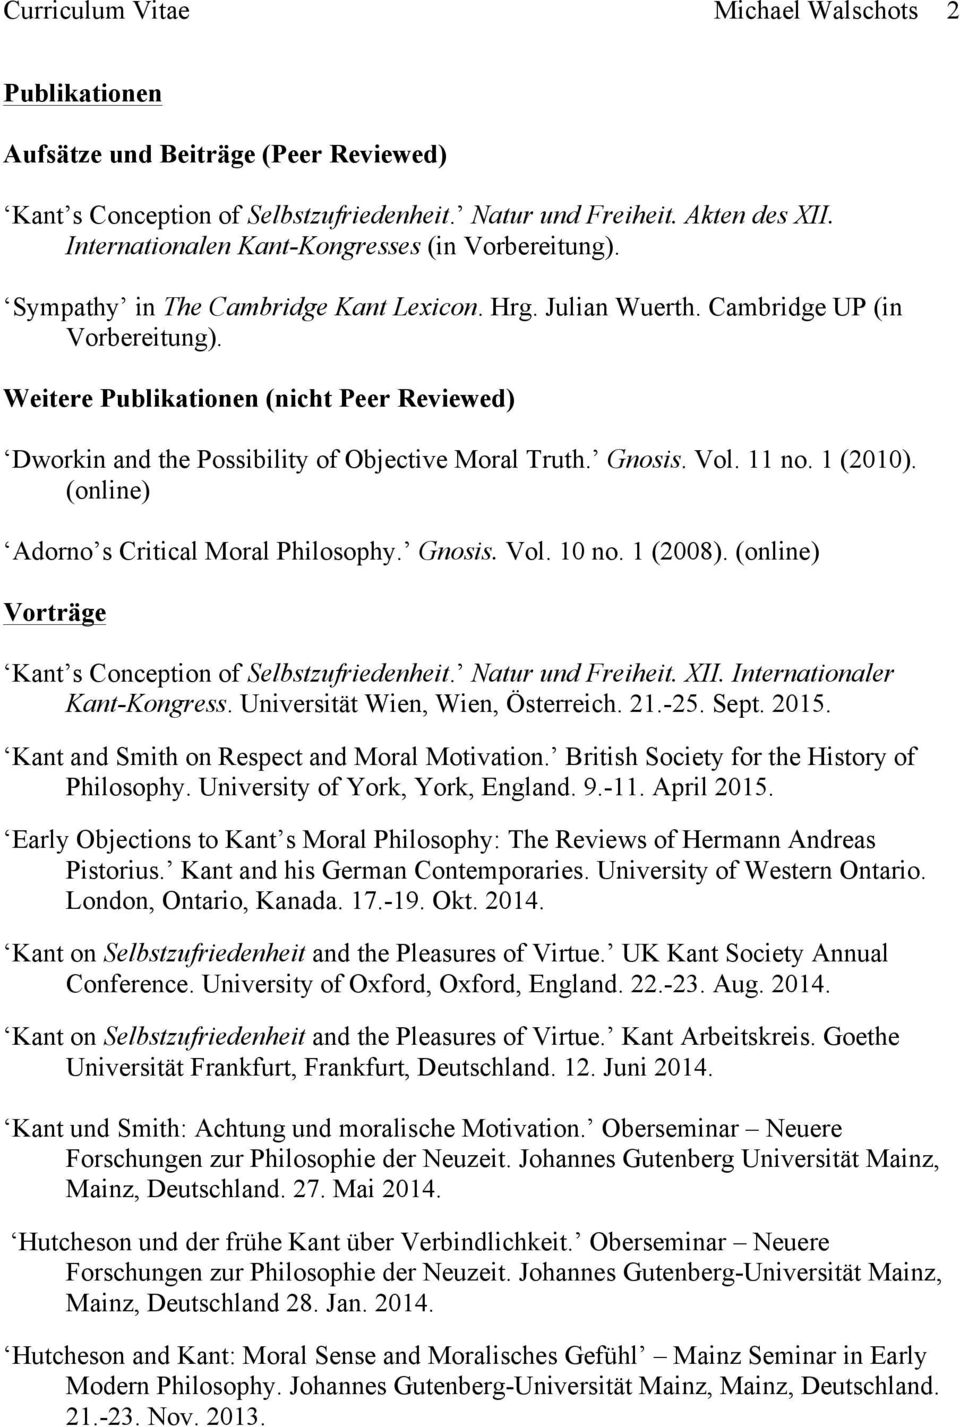 Weitere Publikationen (nicht Peer Reviewed) Dworkin and the Possibility of Objective Moral Truth. Gnosis. Vol. 11 no. 1 (2010). (online) Adorno s Critical Moral Philosophy. Gnosis. Vol. 10 no.